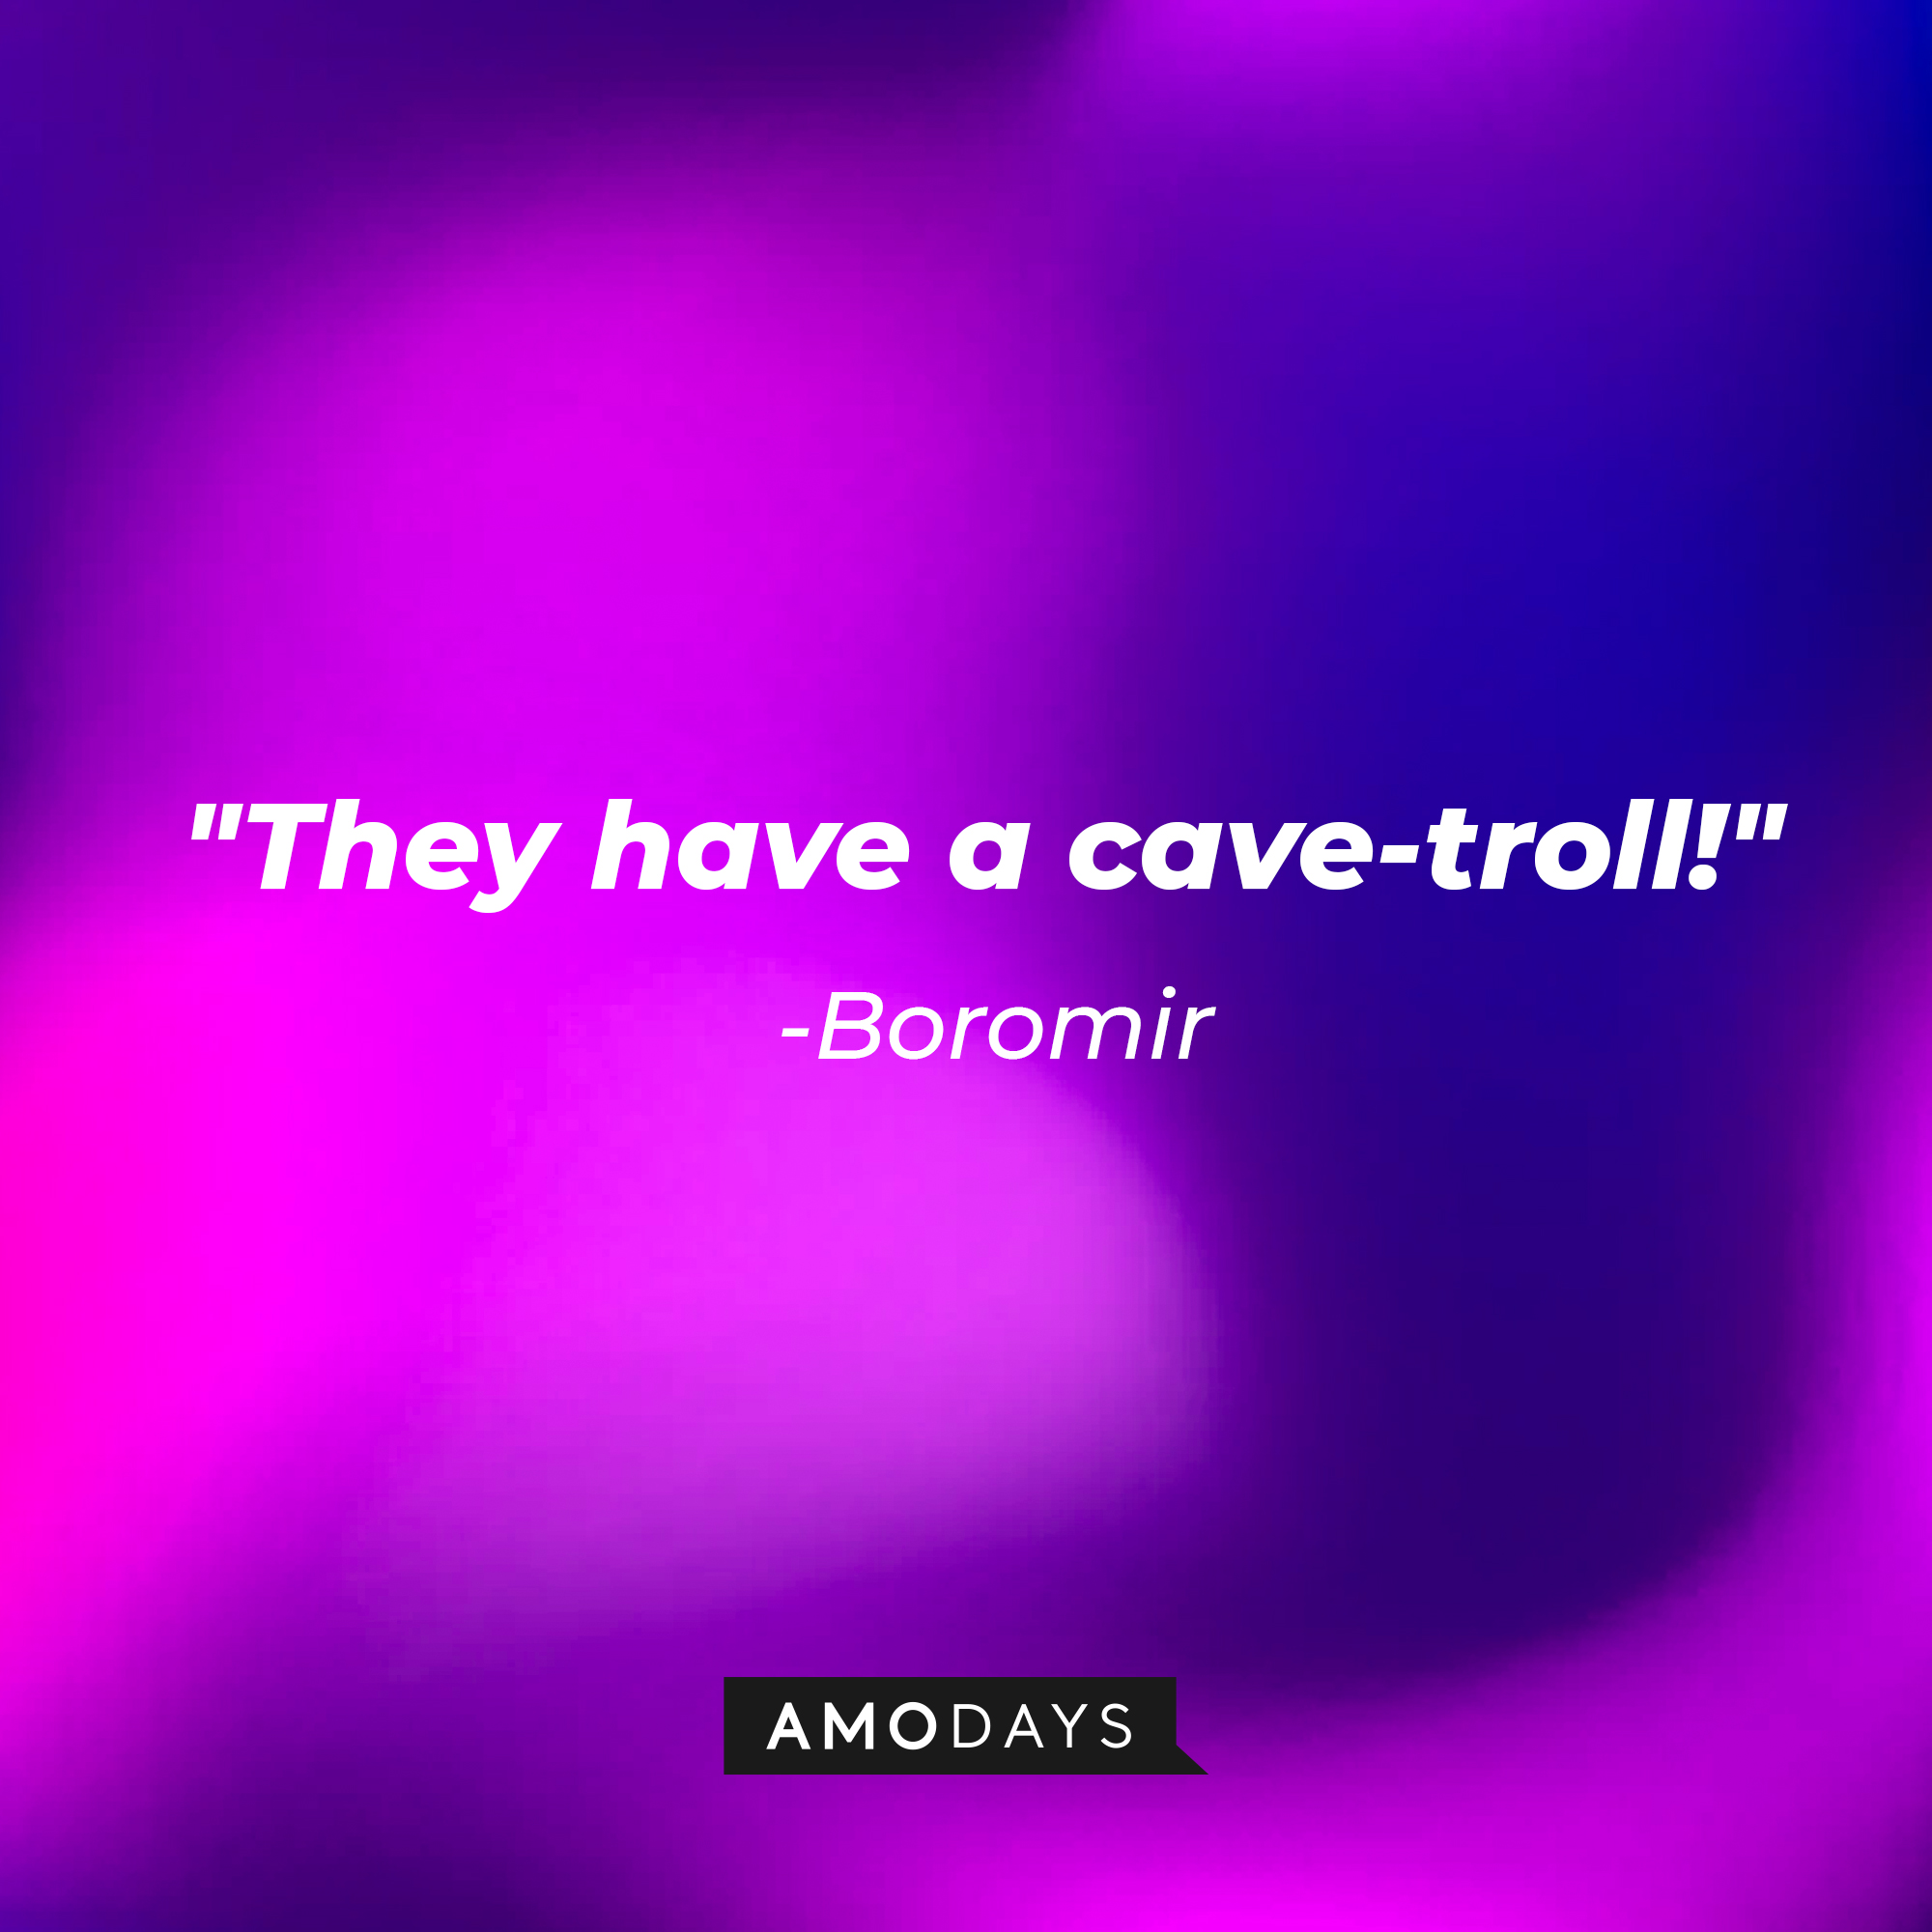 Boromir's quote: "They have a cave-troll!" | Source: AmoDays